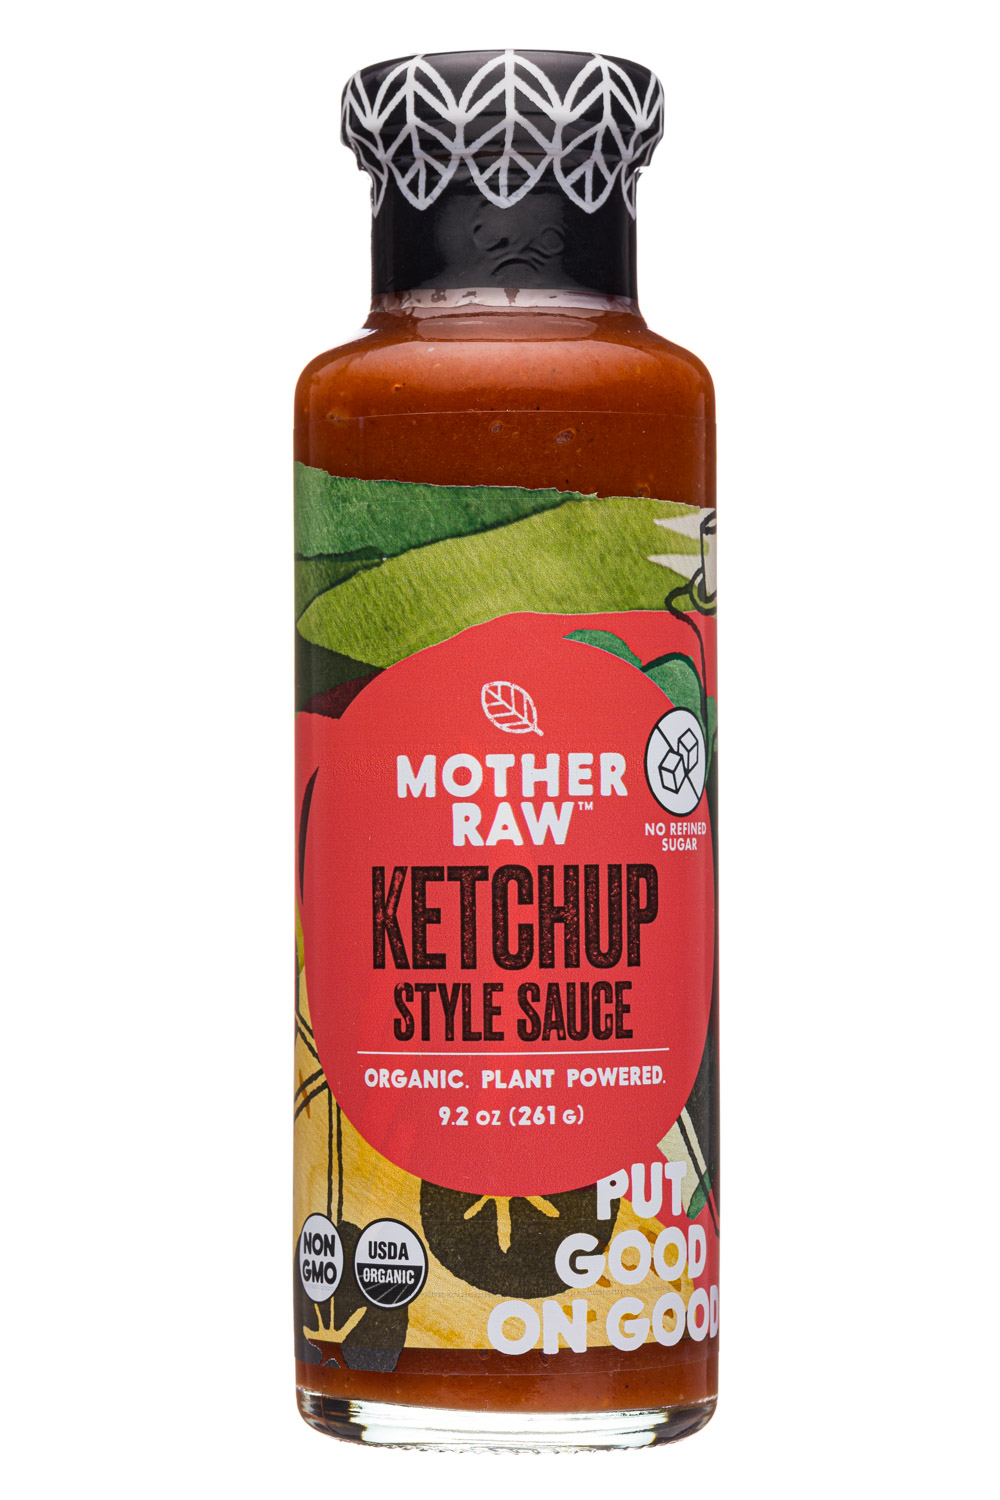 Ketchup Style Sauce